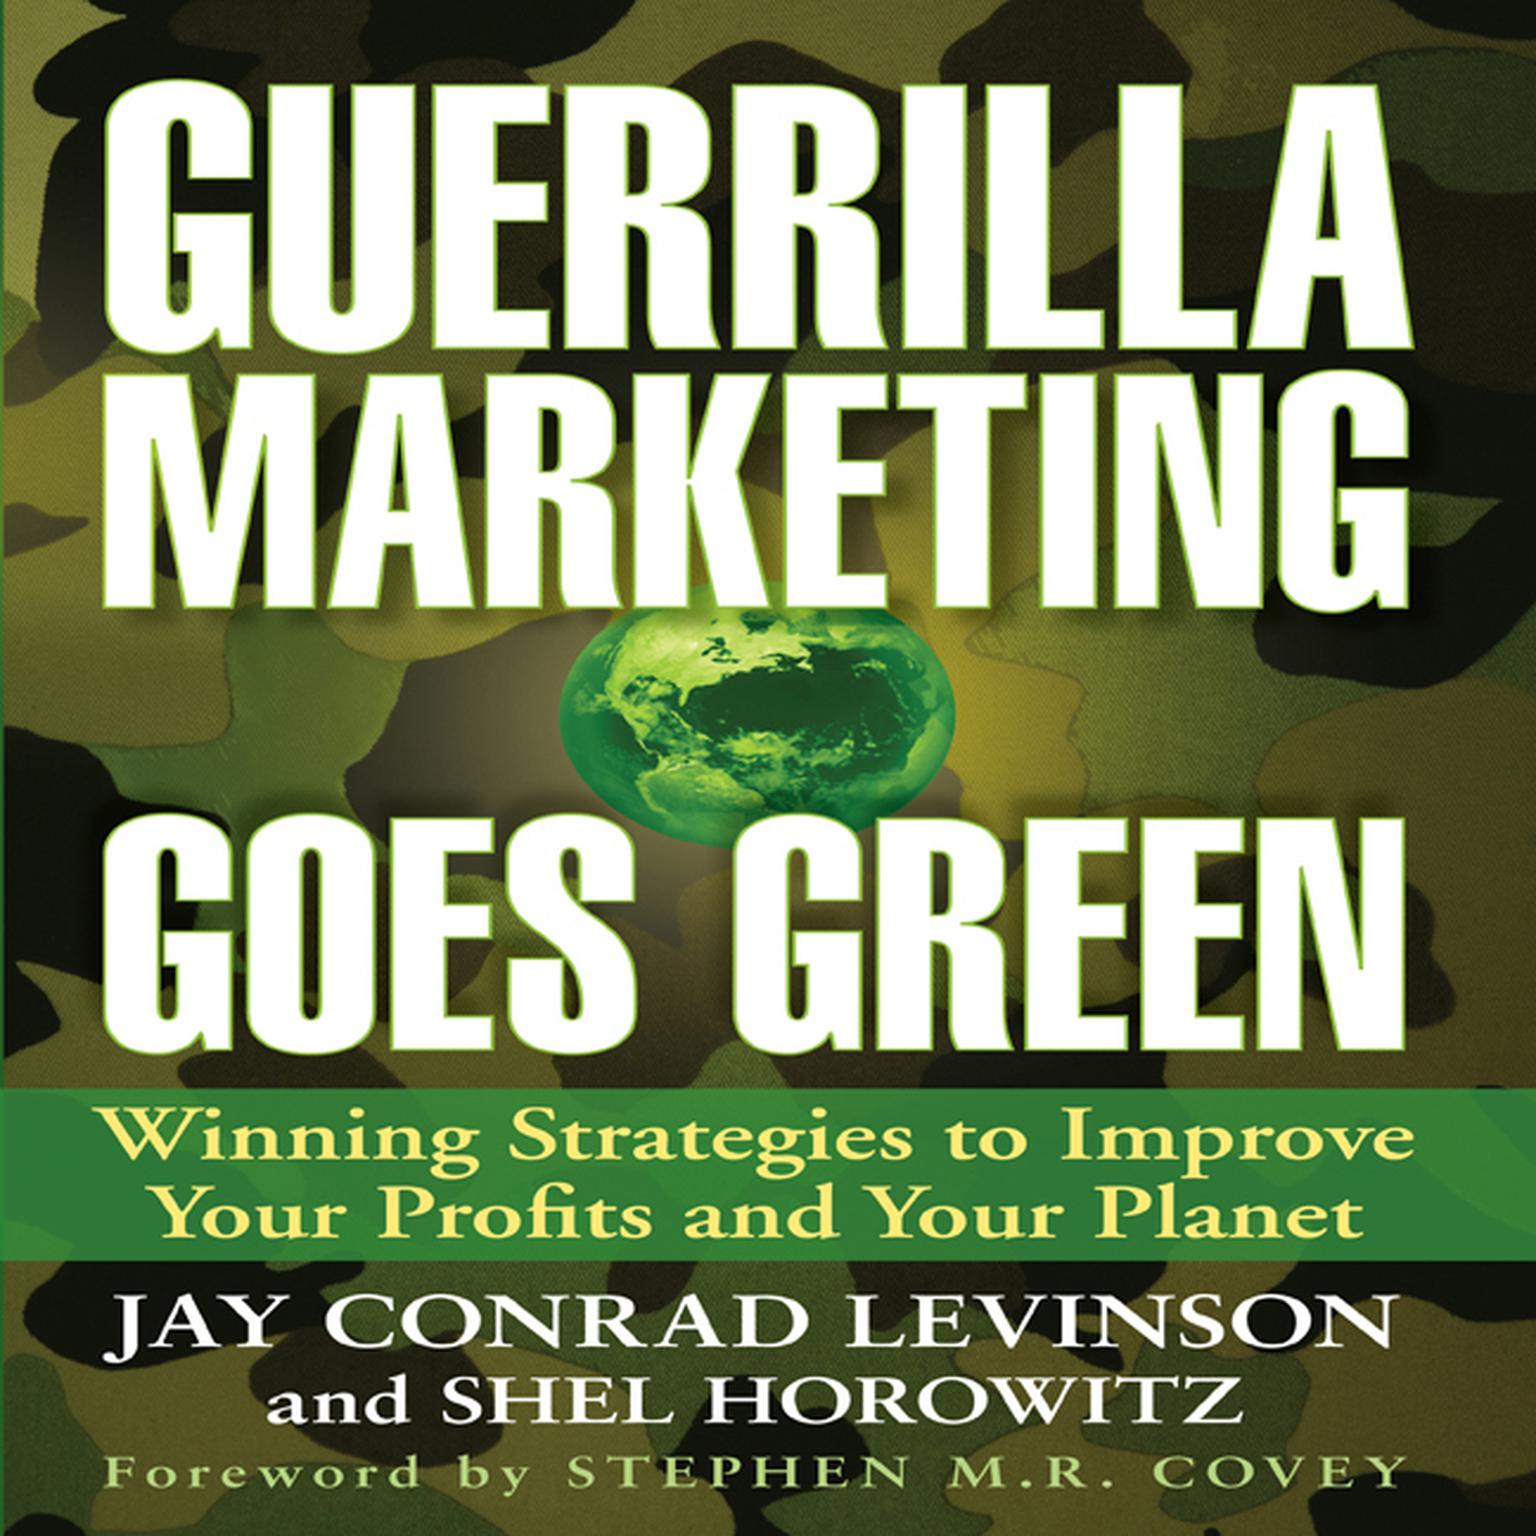 Guerrilla Marketing Goes Green: Winning Strategies to Improve Your Profits and Your Planet Audiobook, by Jay Conrad Levinson